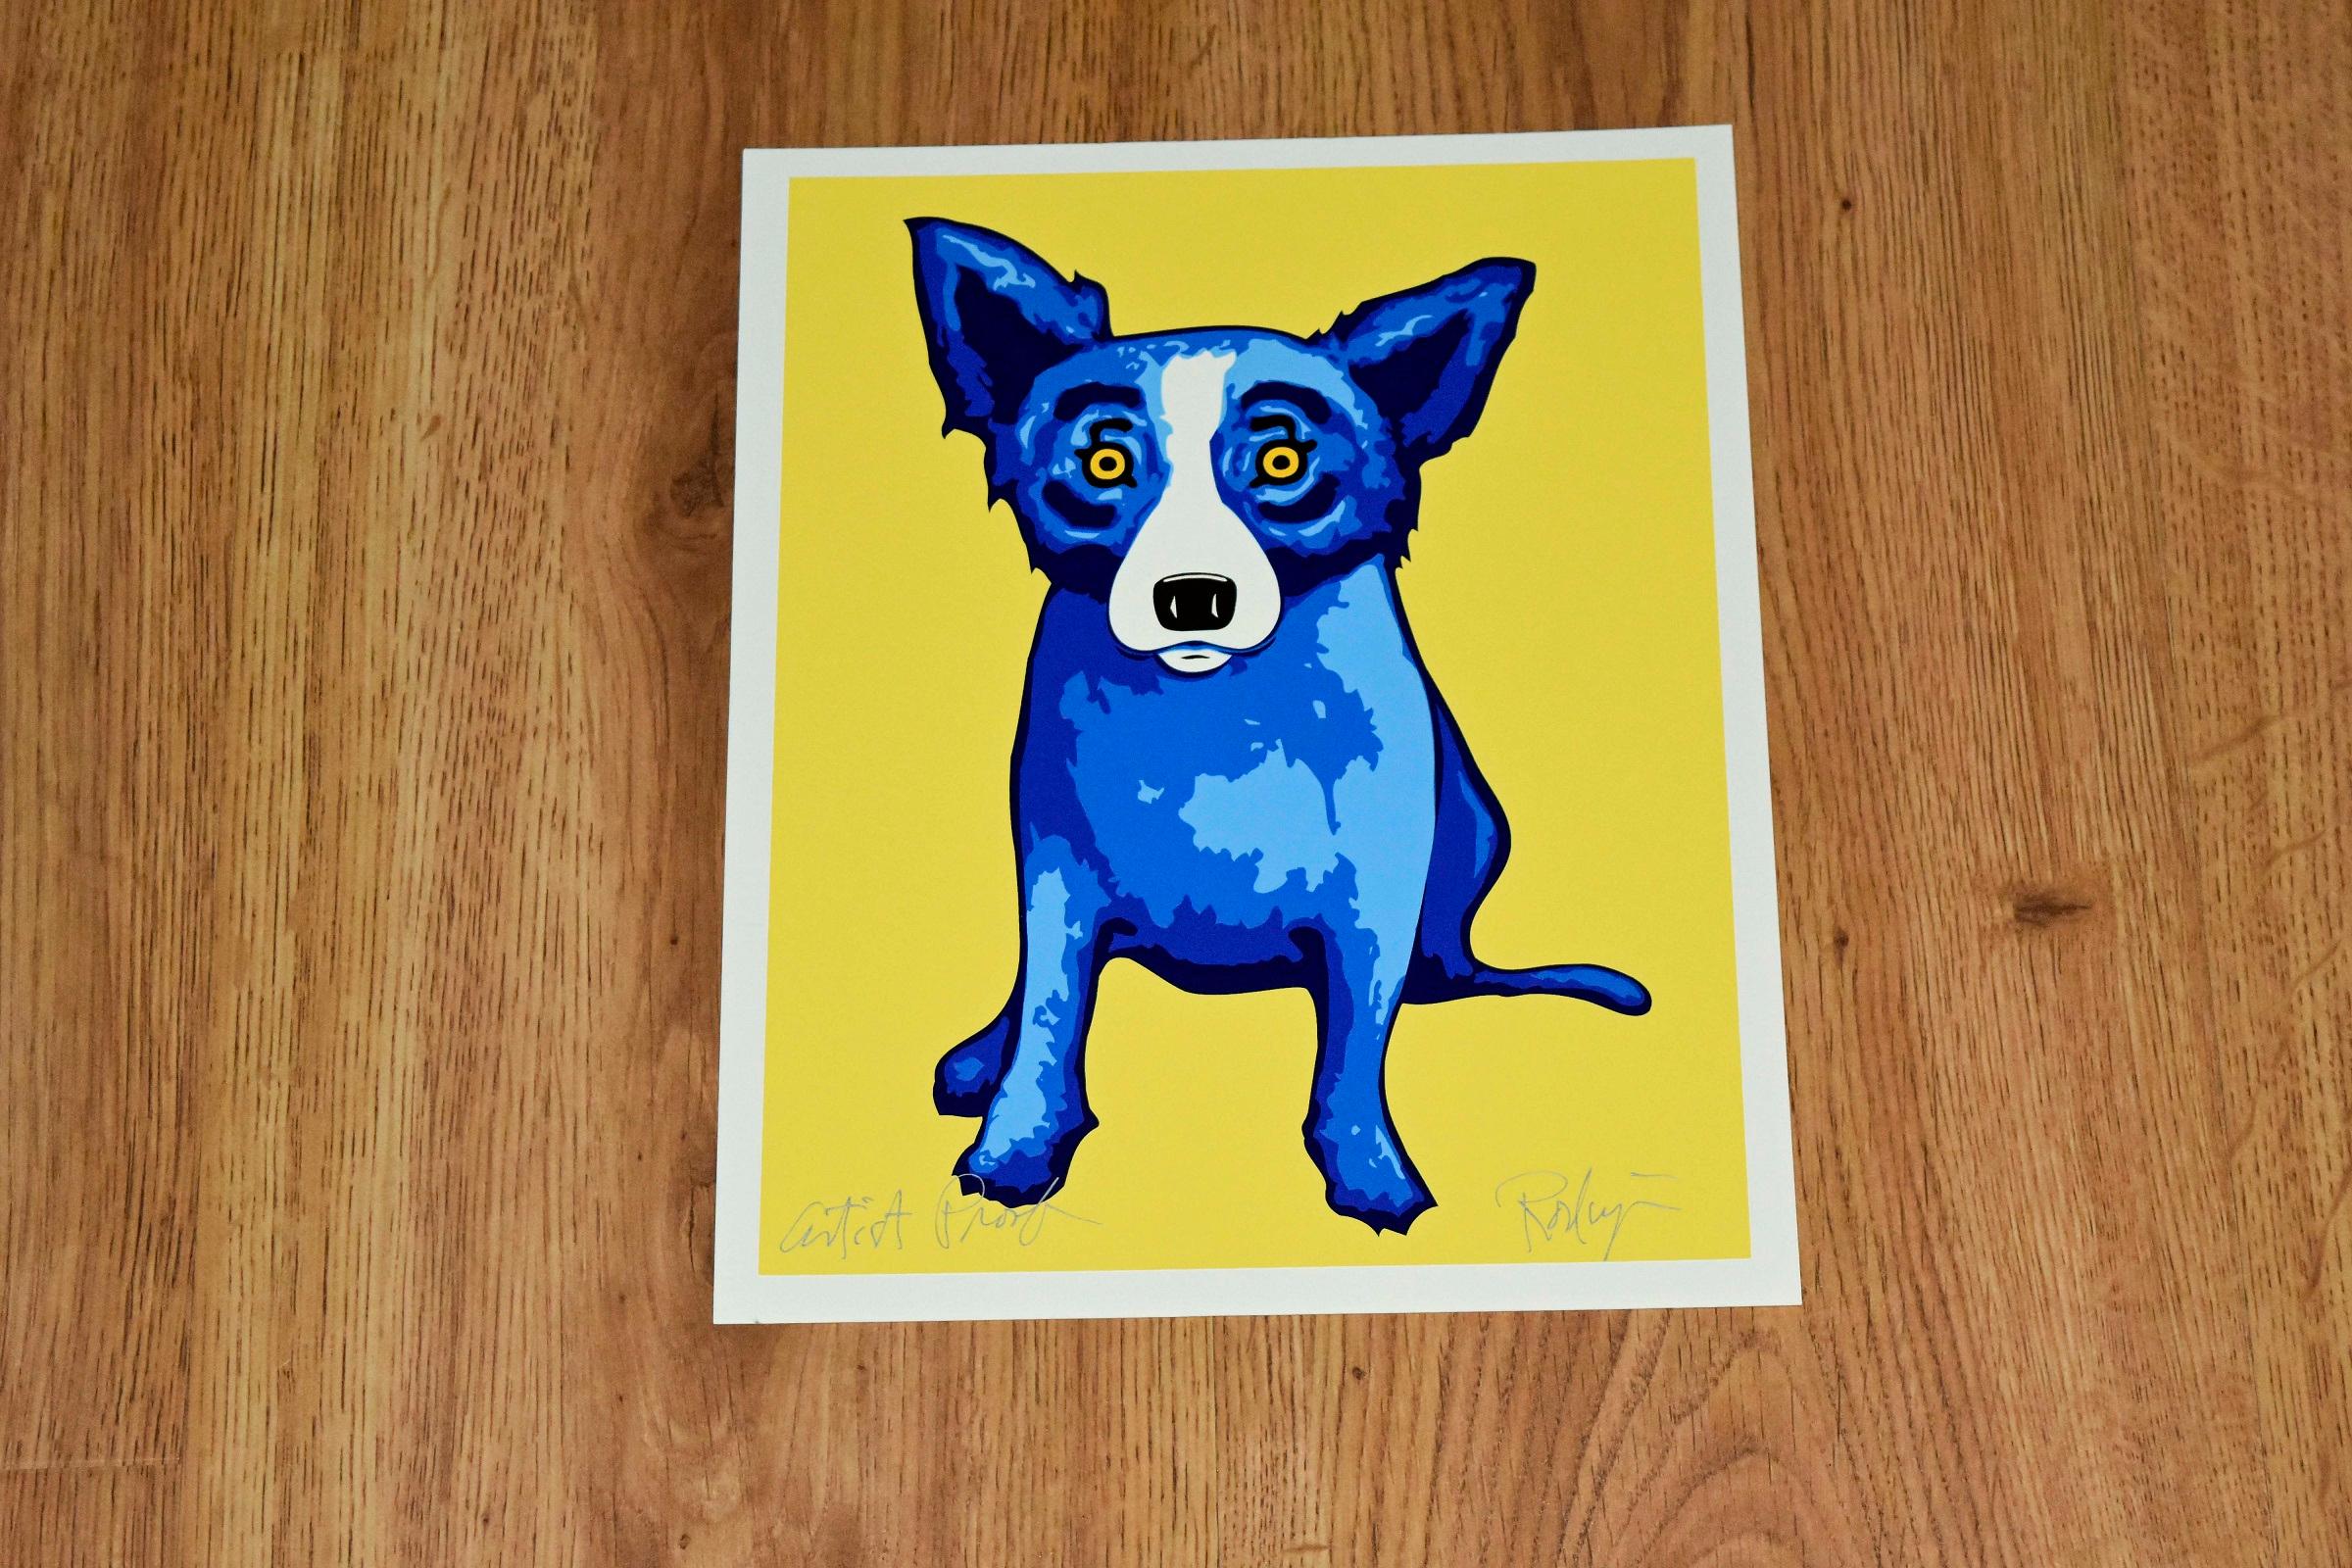 This Blue Dog work consists of a blue dog with soulful eyes on a bright yellow background.  This pop art animal original silkscreen print on paper is guaranteed authentic and is hand signed by the artist.

Artist:  George Rodrigue
Title:  Blue Dog